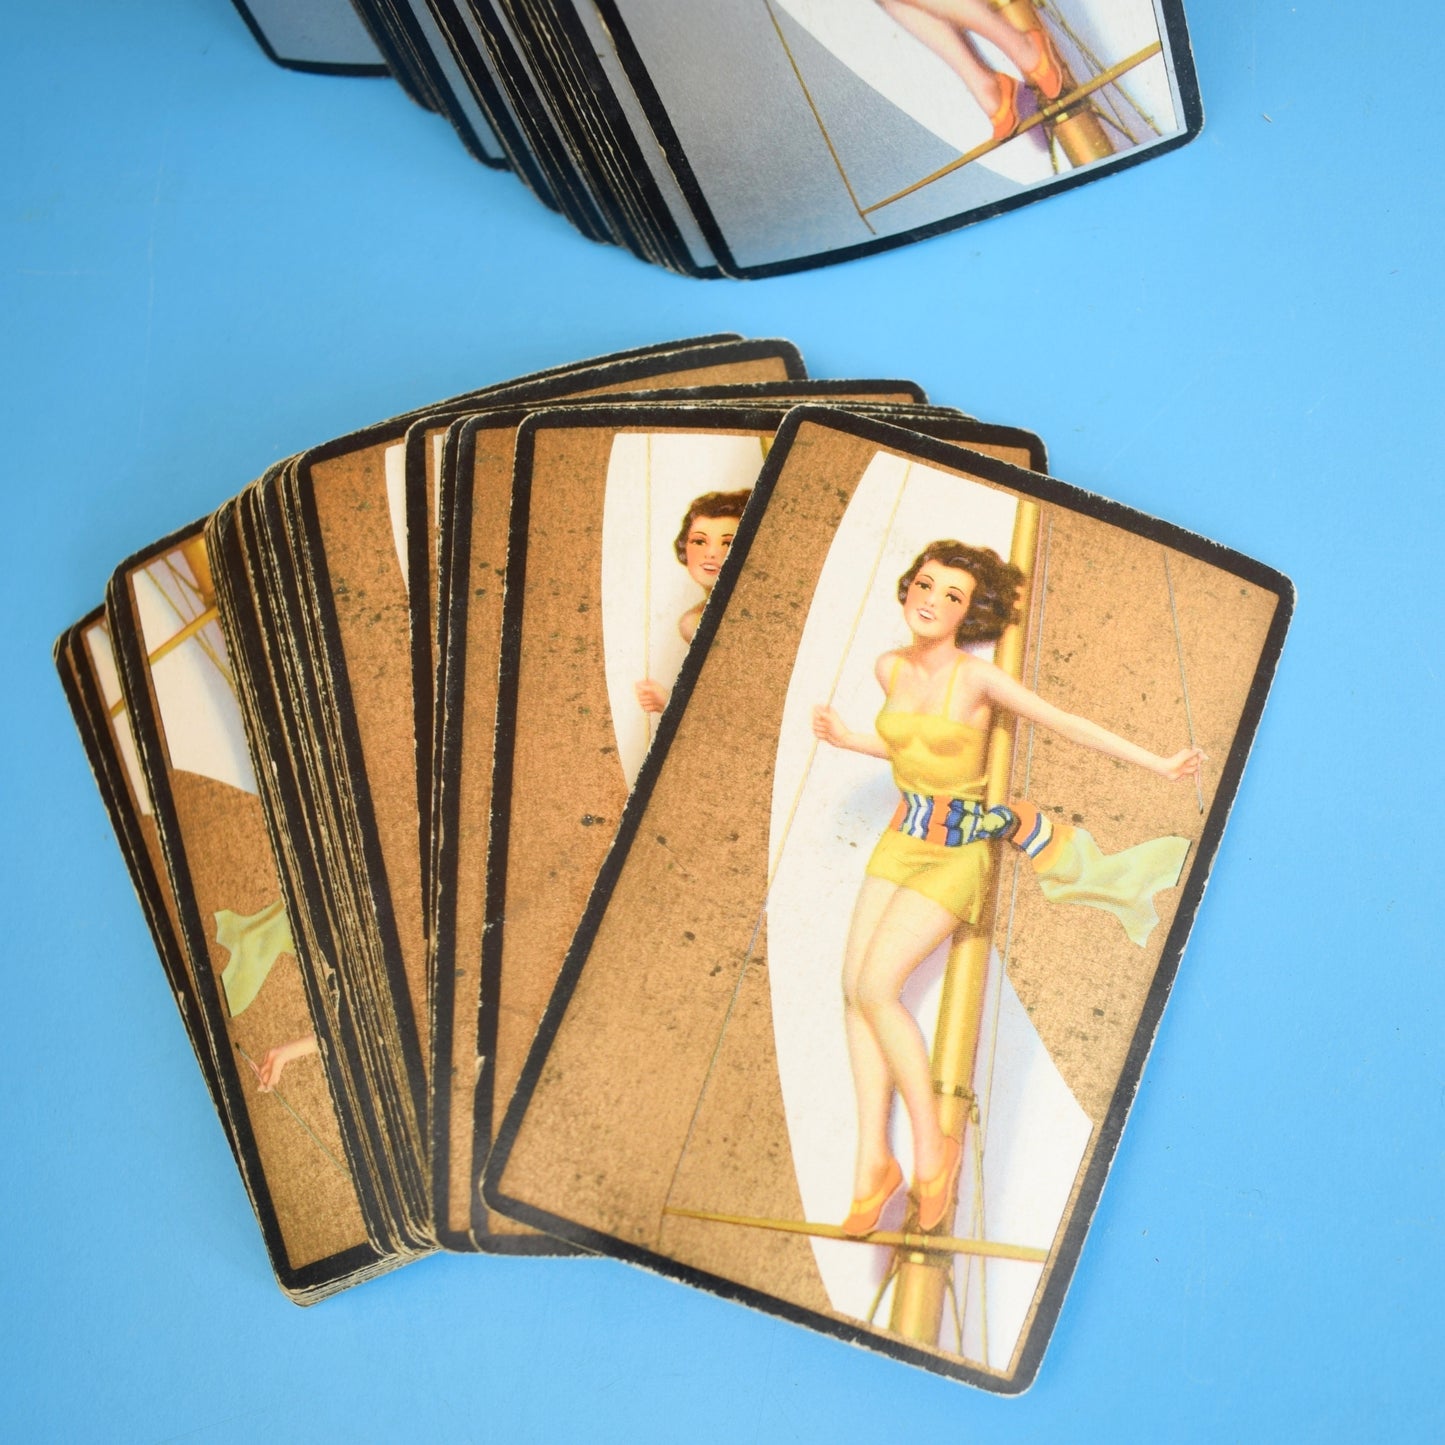 Vintage 1940s Playing Card Set - Pin Up Lady